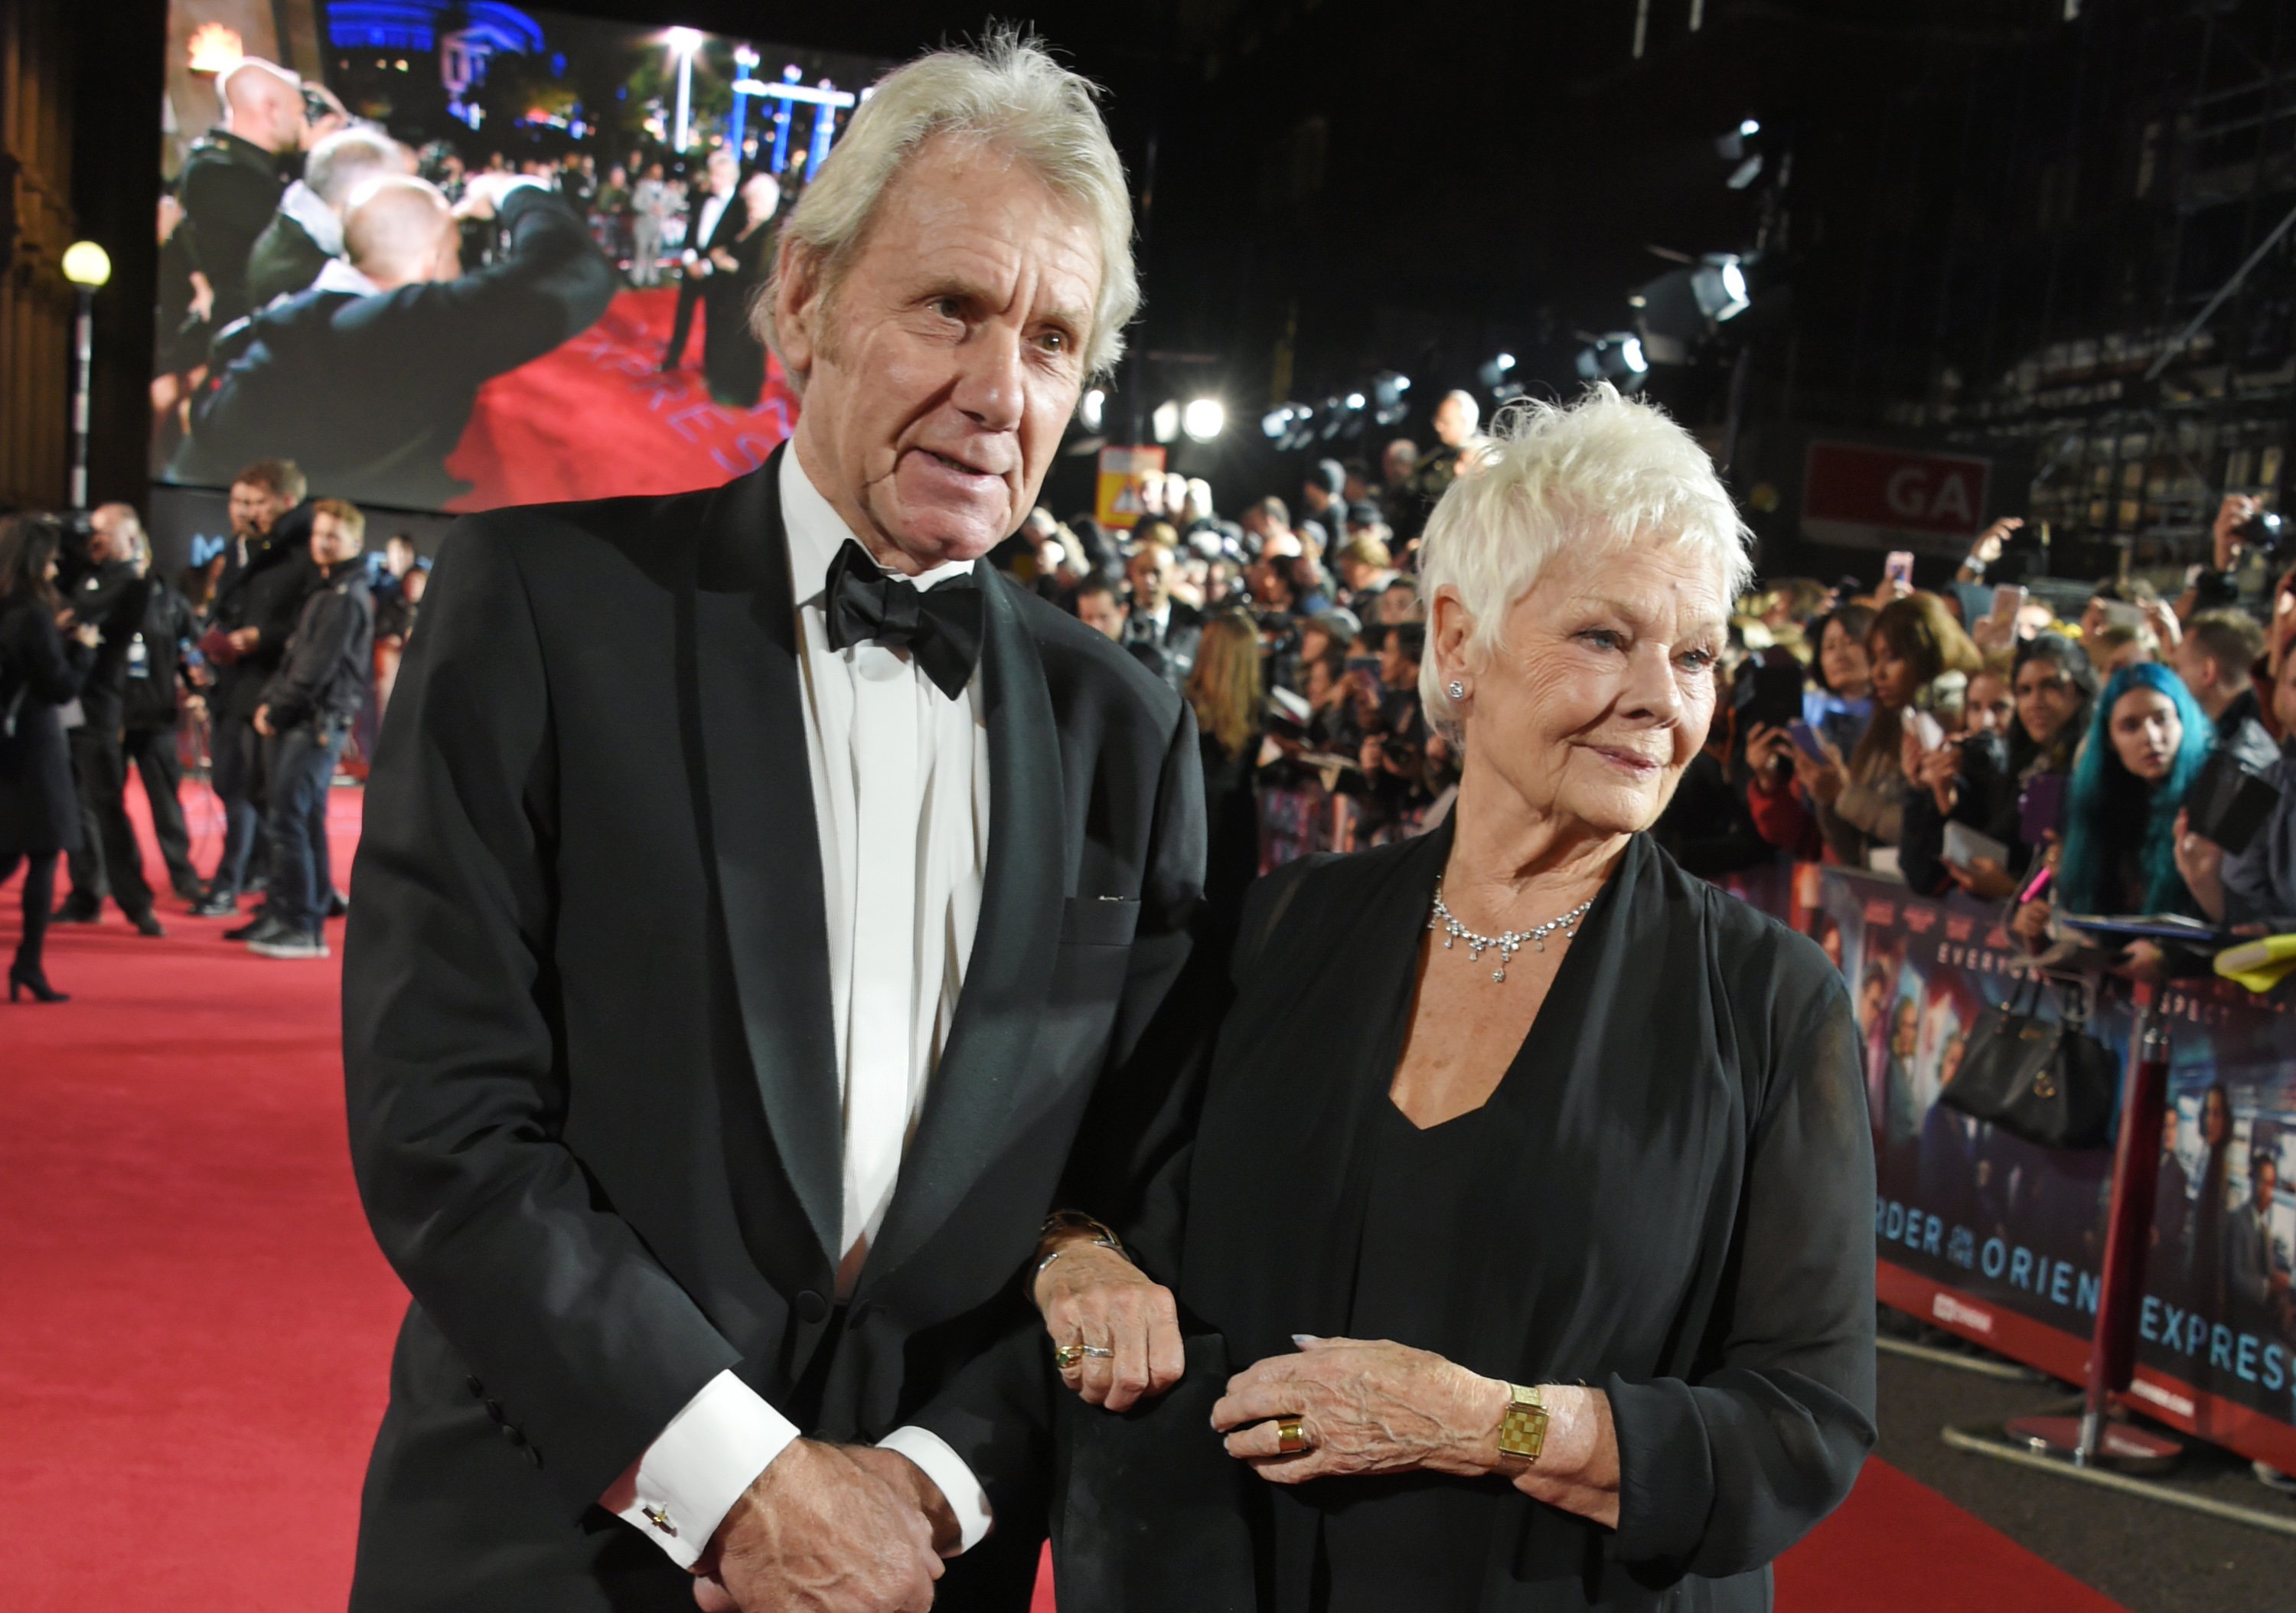 Judi Dench and David Mills at the world premiere of "Murder On The Orient Express" on November 2, 2017 | Source: Getty Images